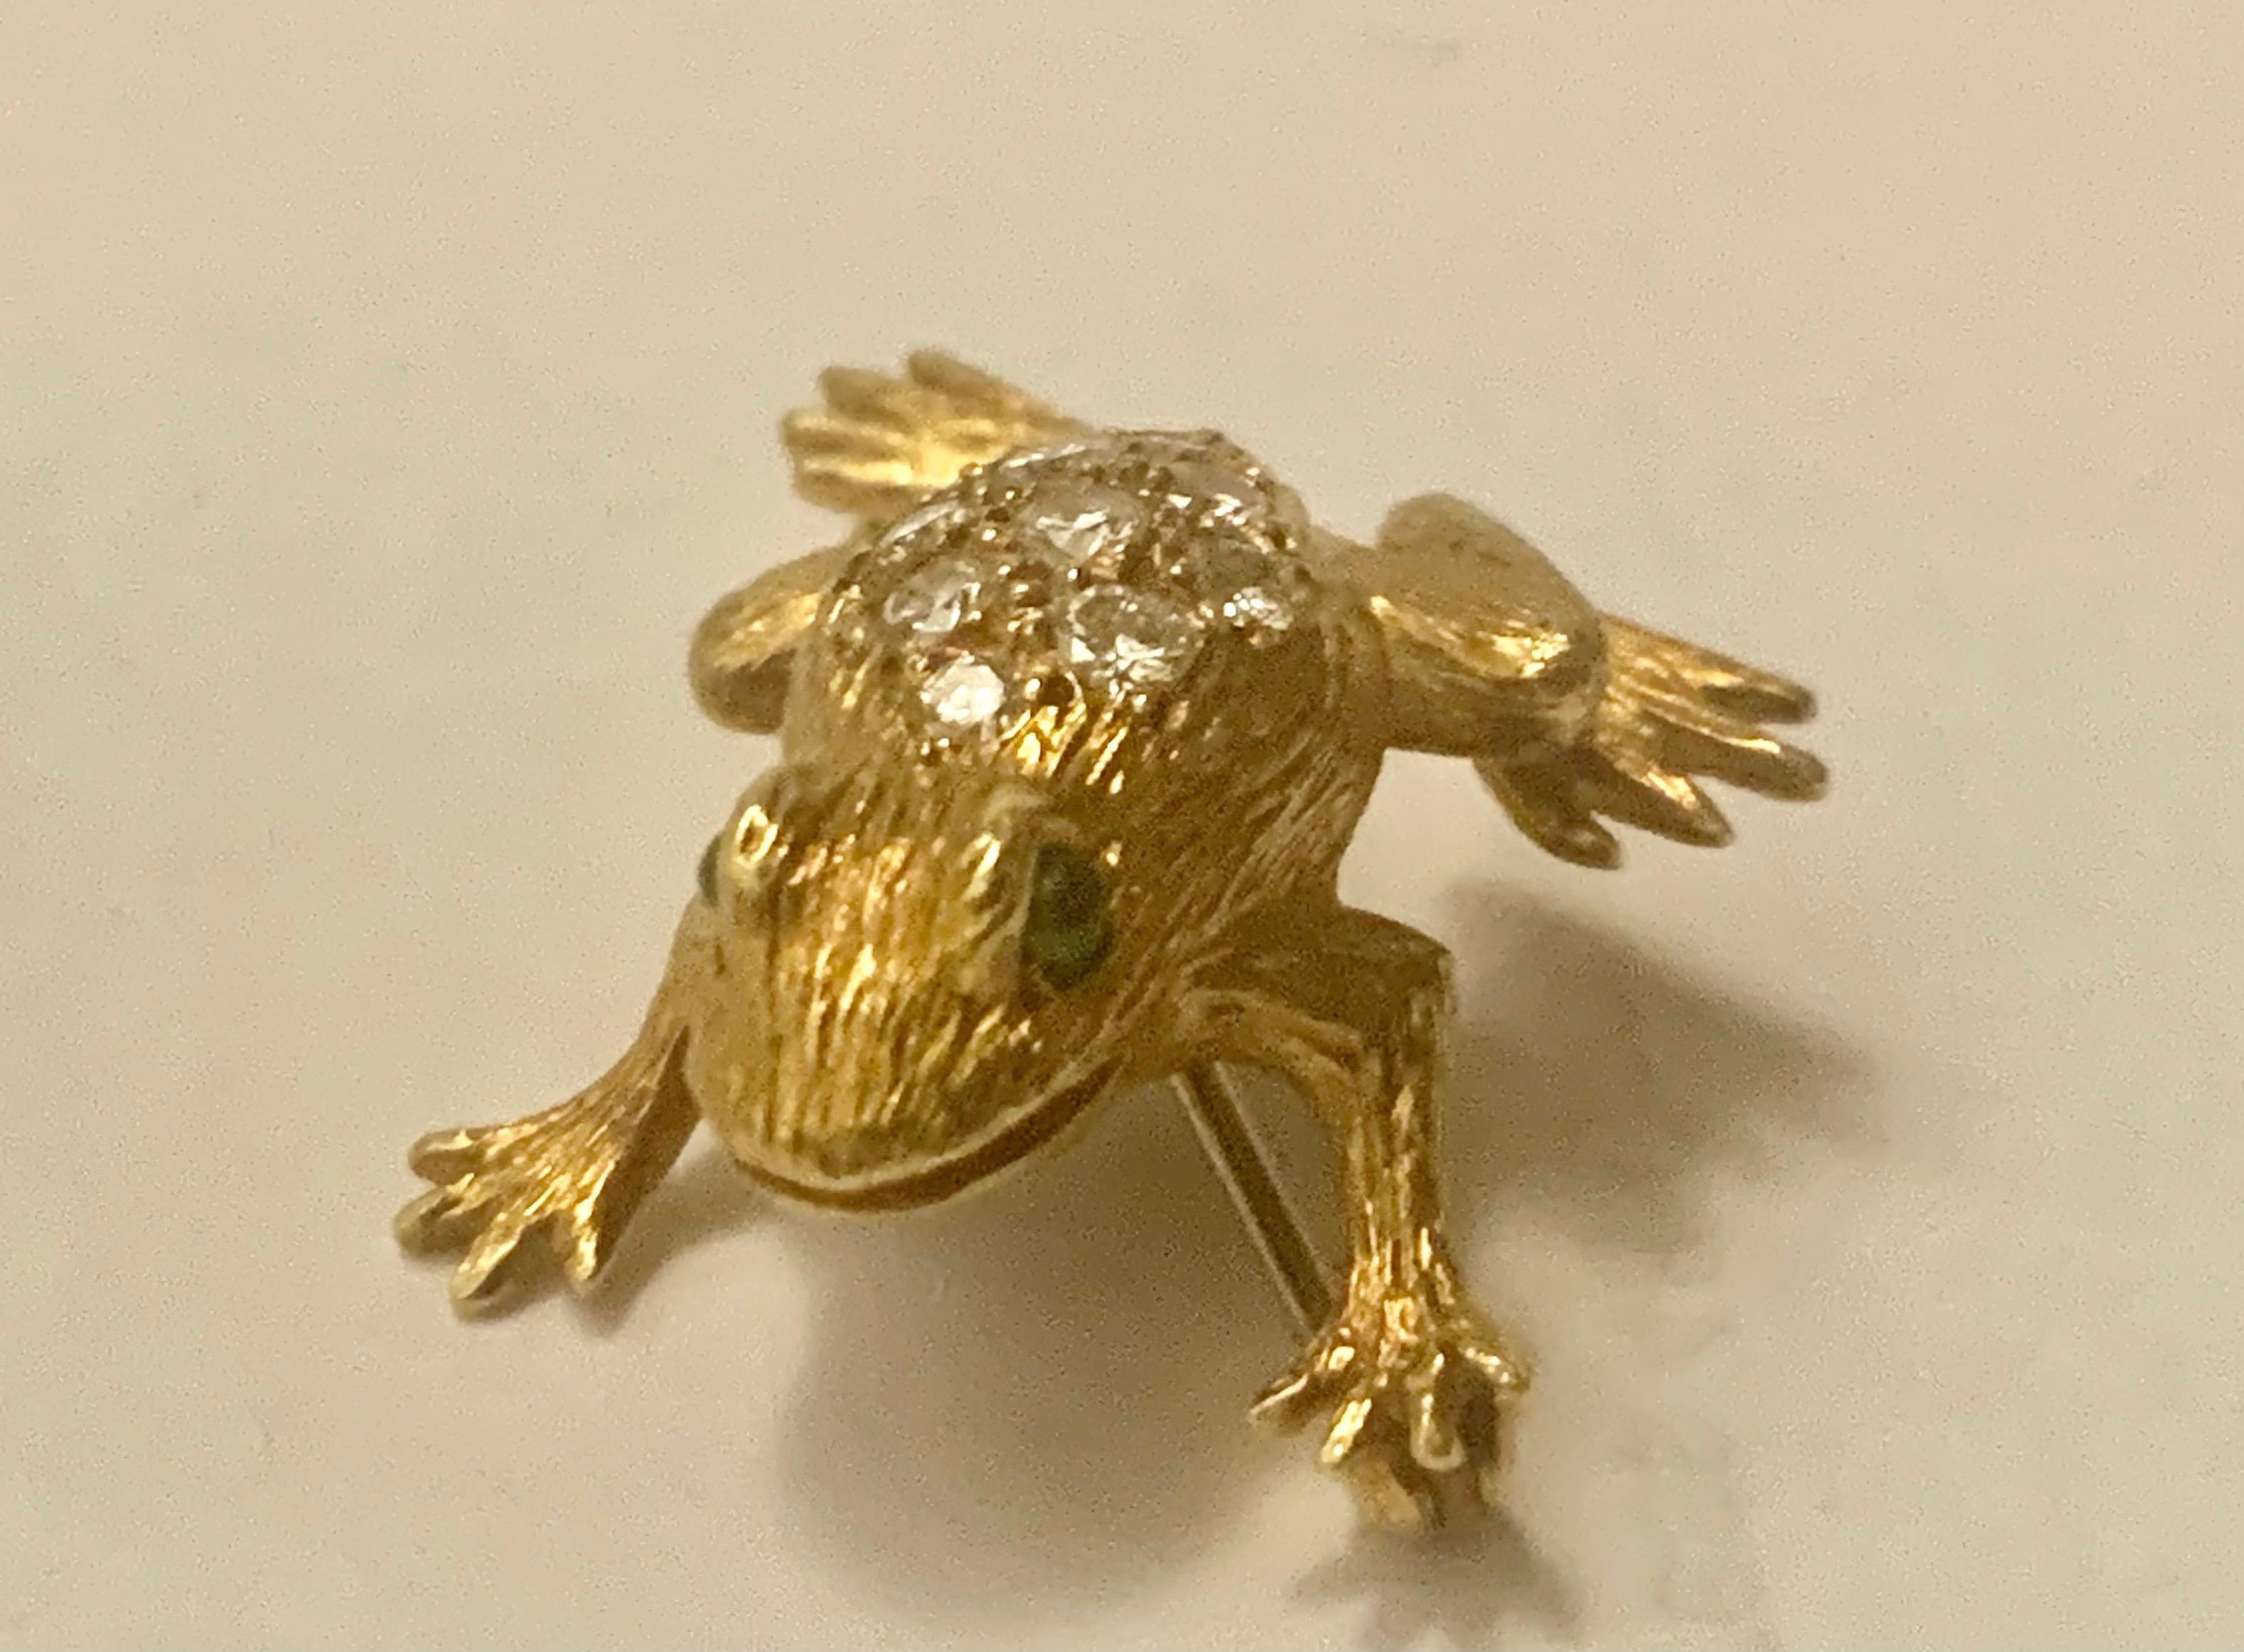 This fine quality vintage gold brooch has been produced in 18 carat yellow gold.
E. Wolfe & Co is a London based family run fine jewellery manufacturer, established in 1850's. They specialize in gem set novelty insects, animals and fish etc.
The